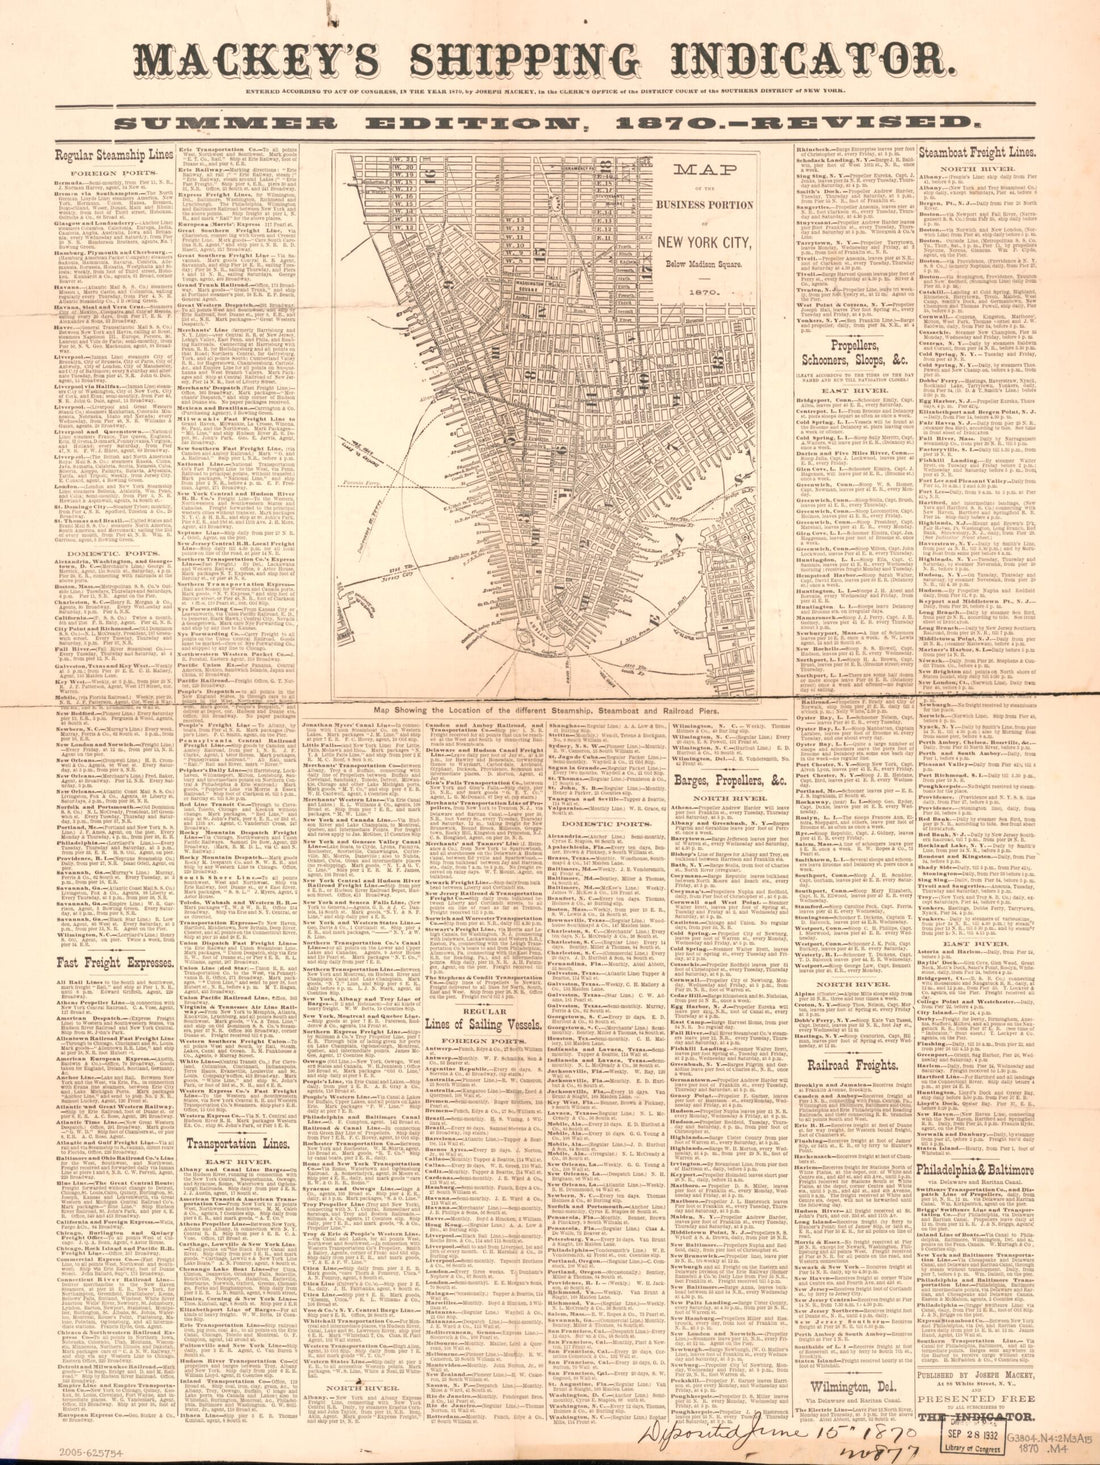 This old map of Map of the Business Portion of New York City Below Madison Square : from 1870. (Map Showing the Location of the Different Steamship, Steamboat, and Railroad Piers) was created by Joseph Mackey in 1870